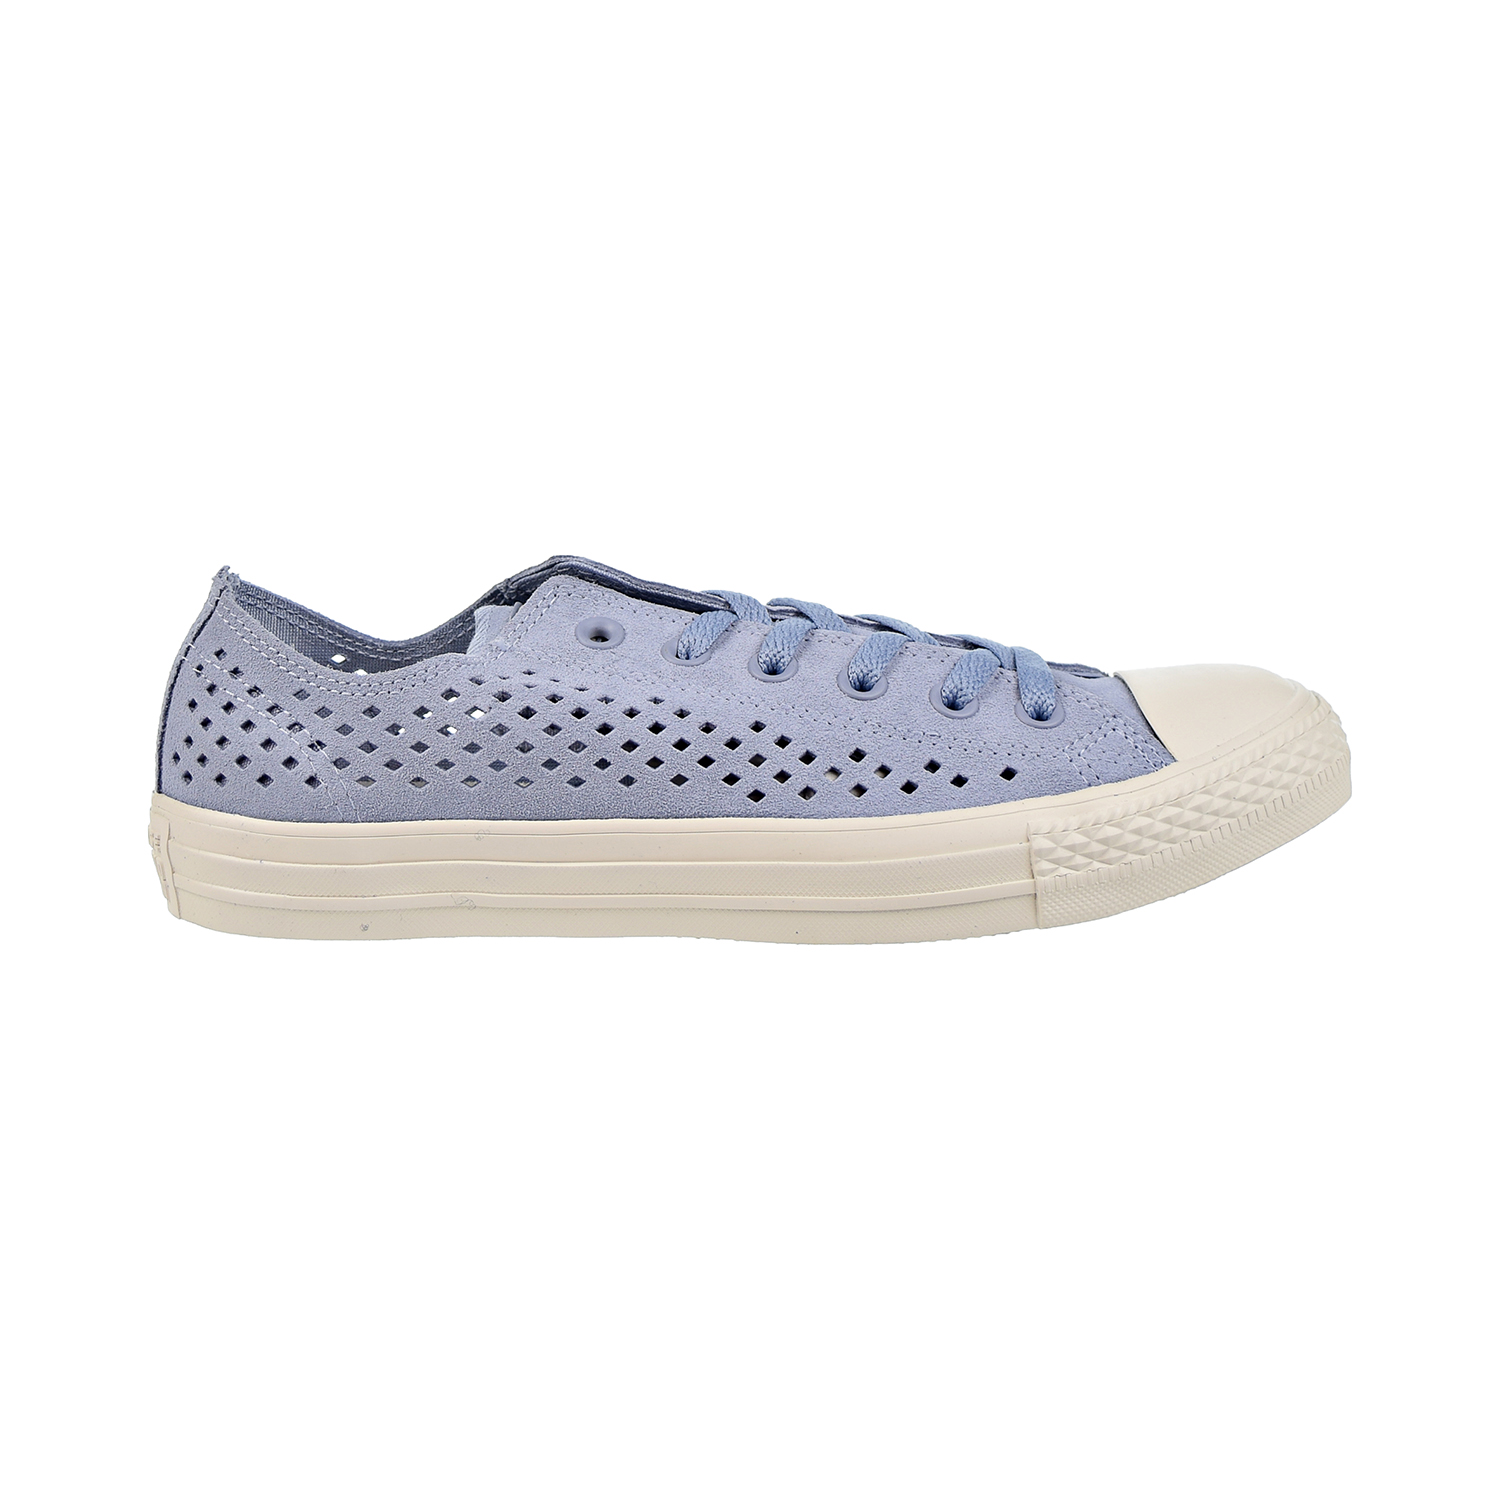 Shoes Perforated Glacier Grey 160461C 